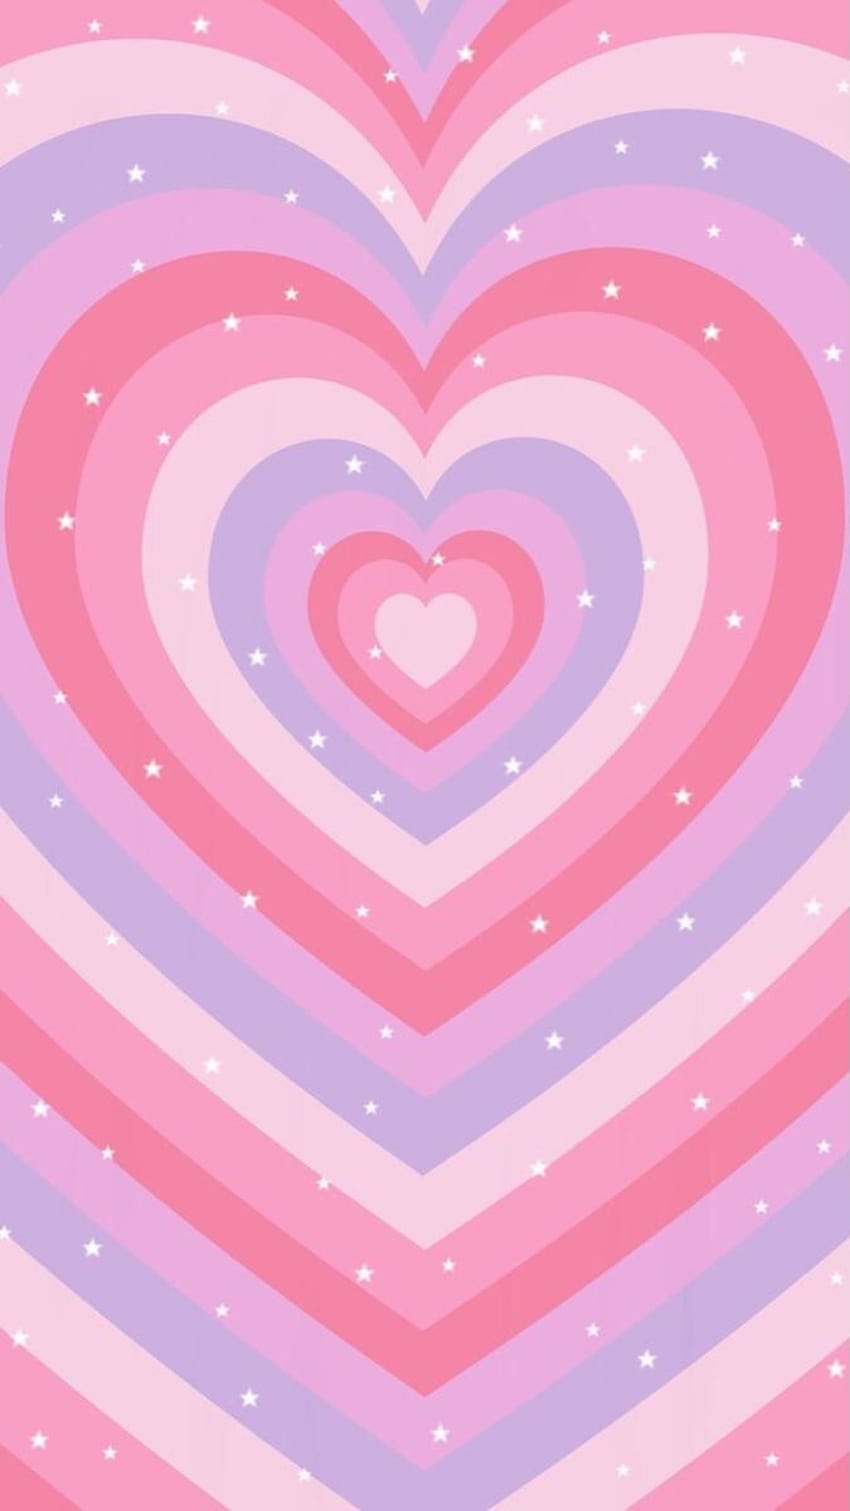 Aesthetic background with hearts and stars - Pink phone, pink heart